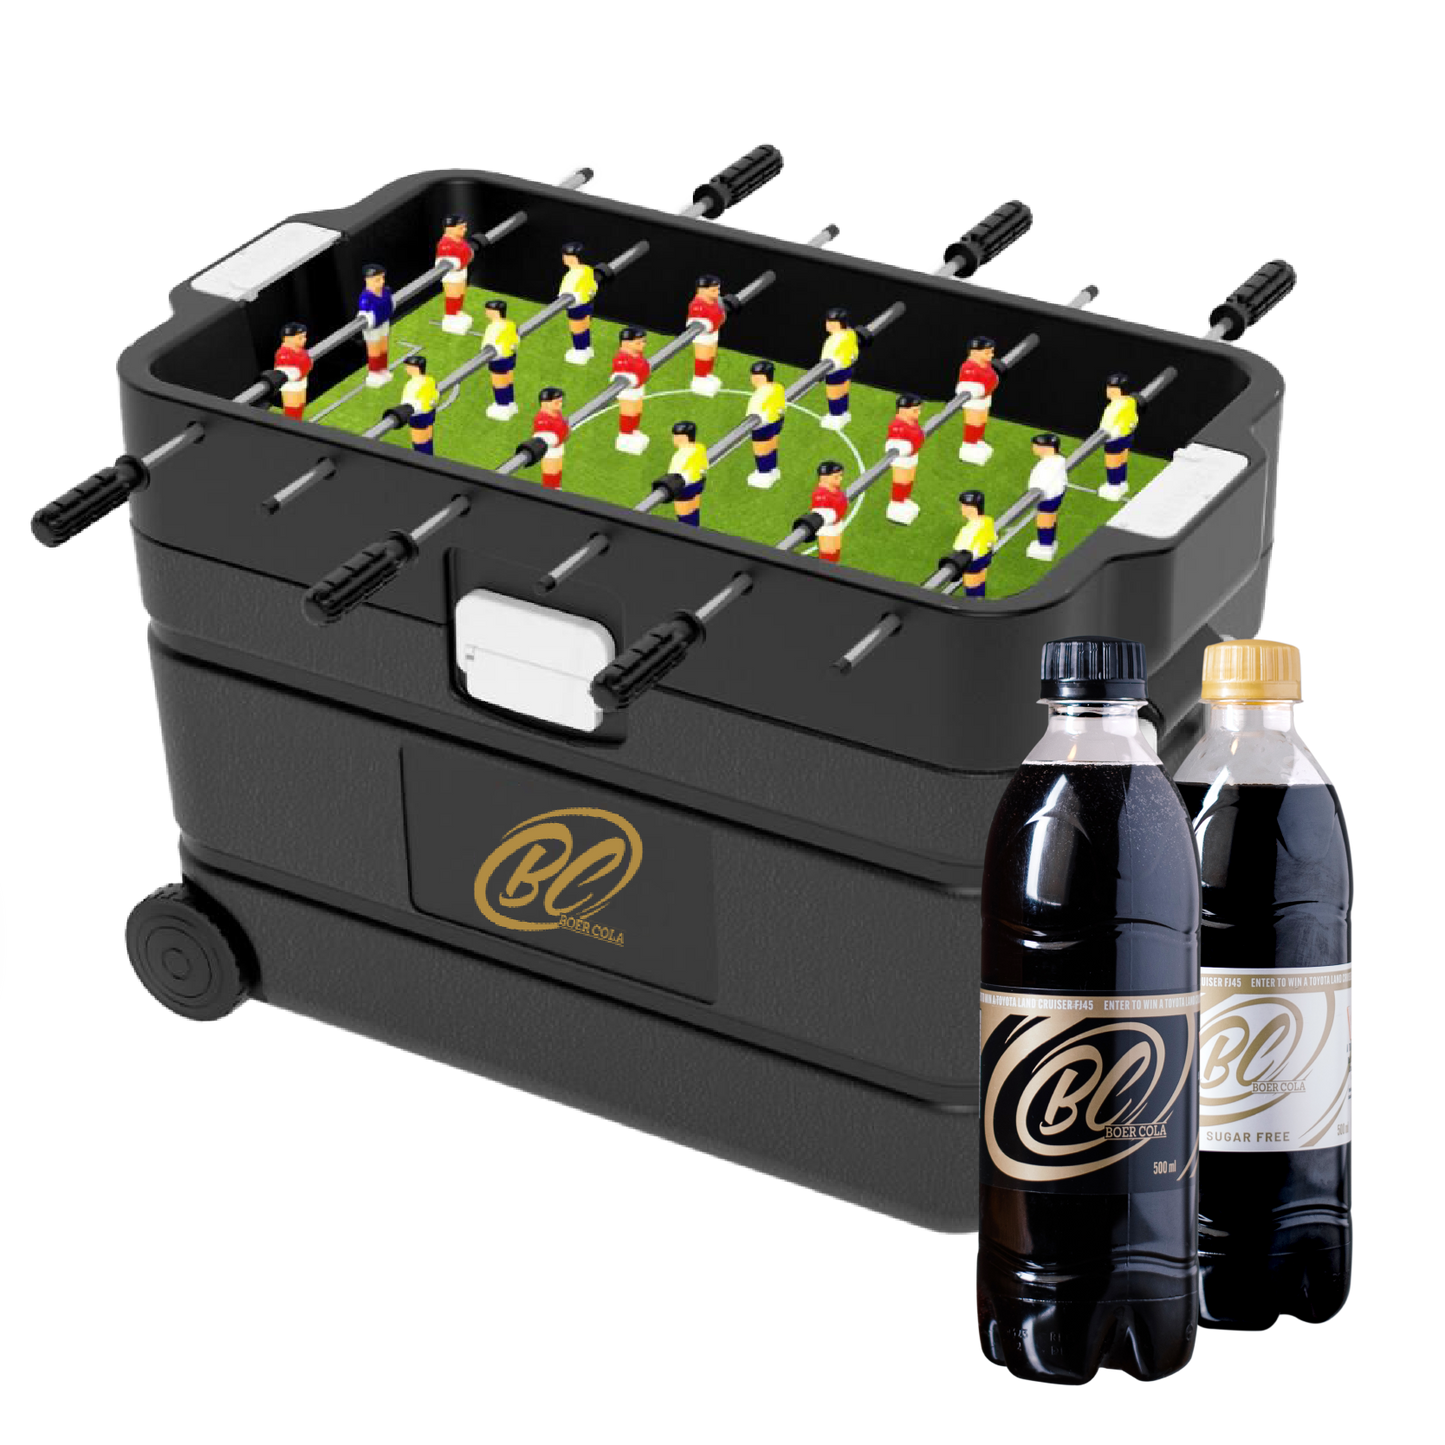 Boer Cola 60L Cooler with Foosball Table + 2 Cases of Boer Cola